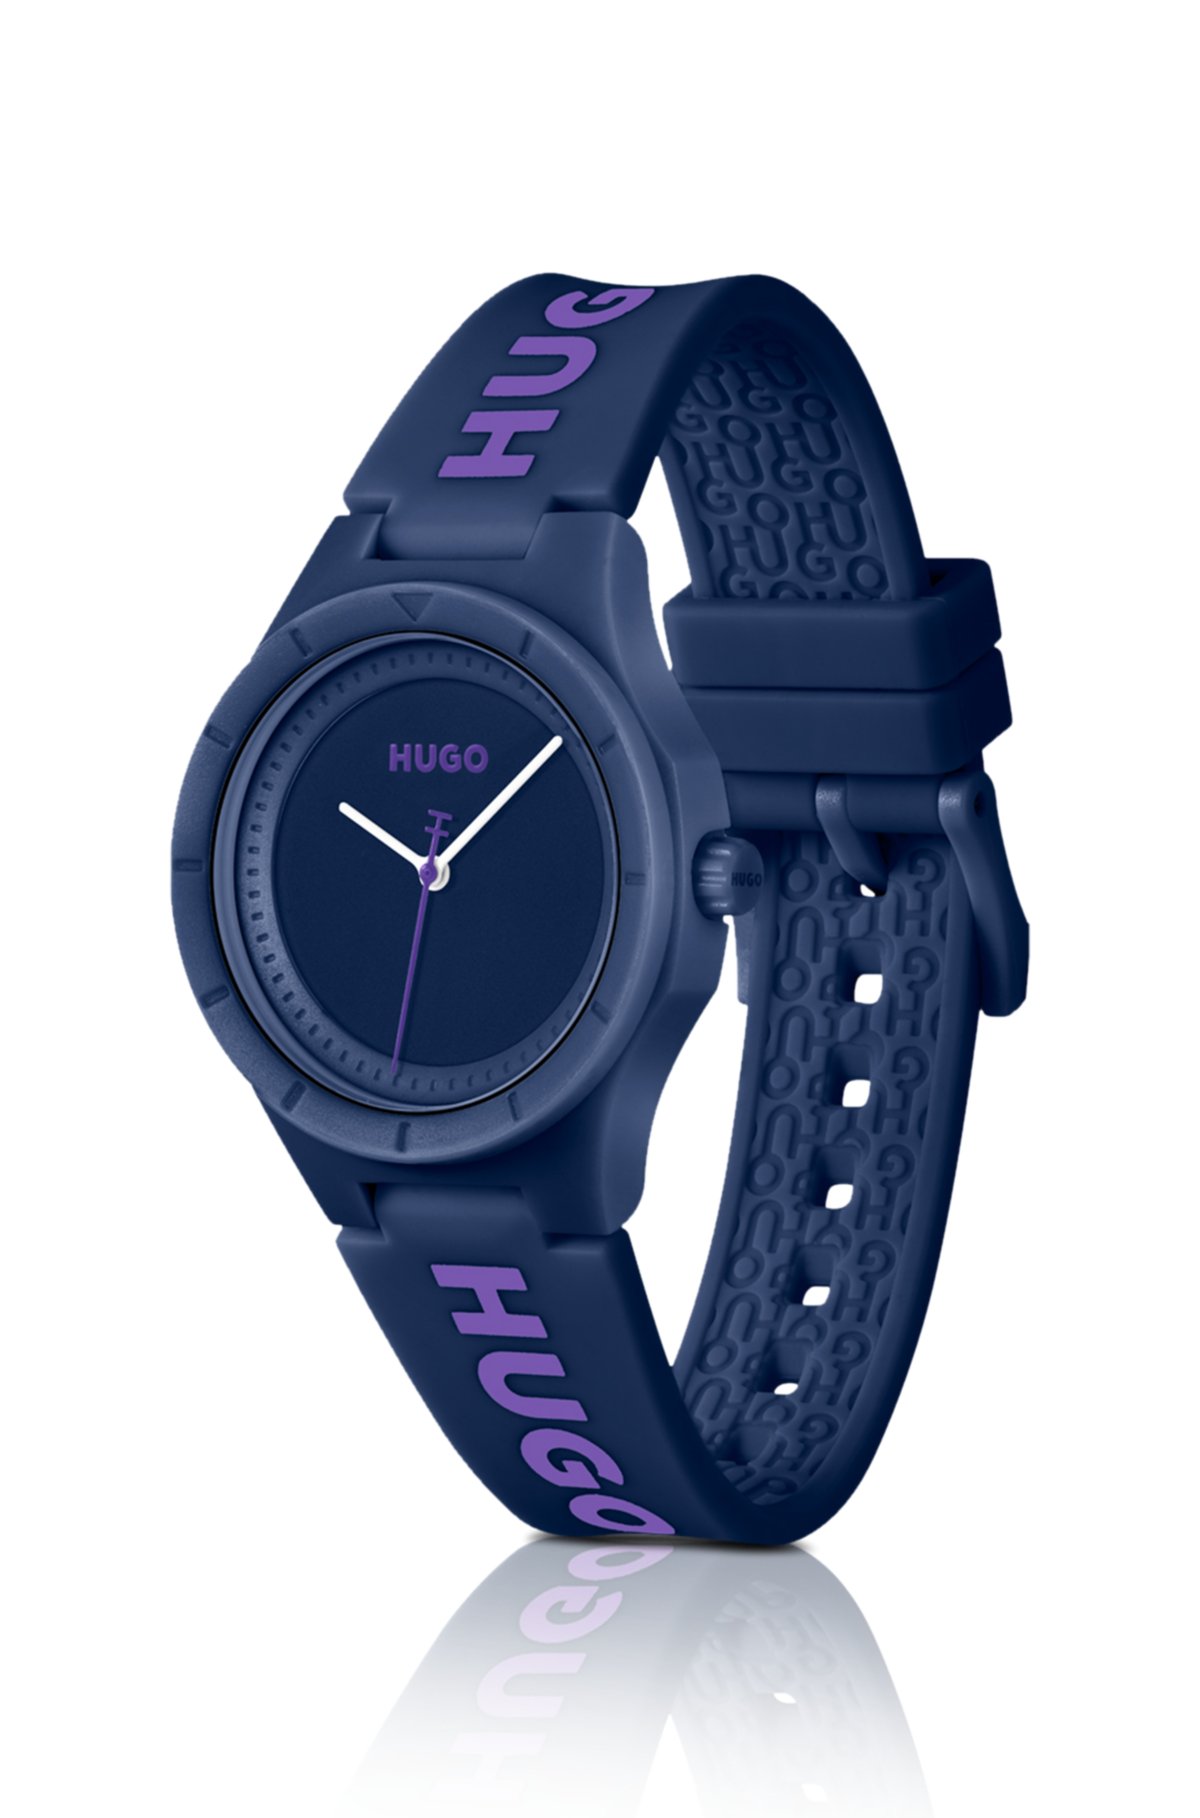 Branded-silicone-strap watch with aubergine dial, Blue